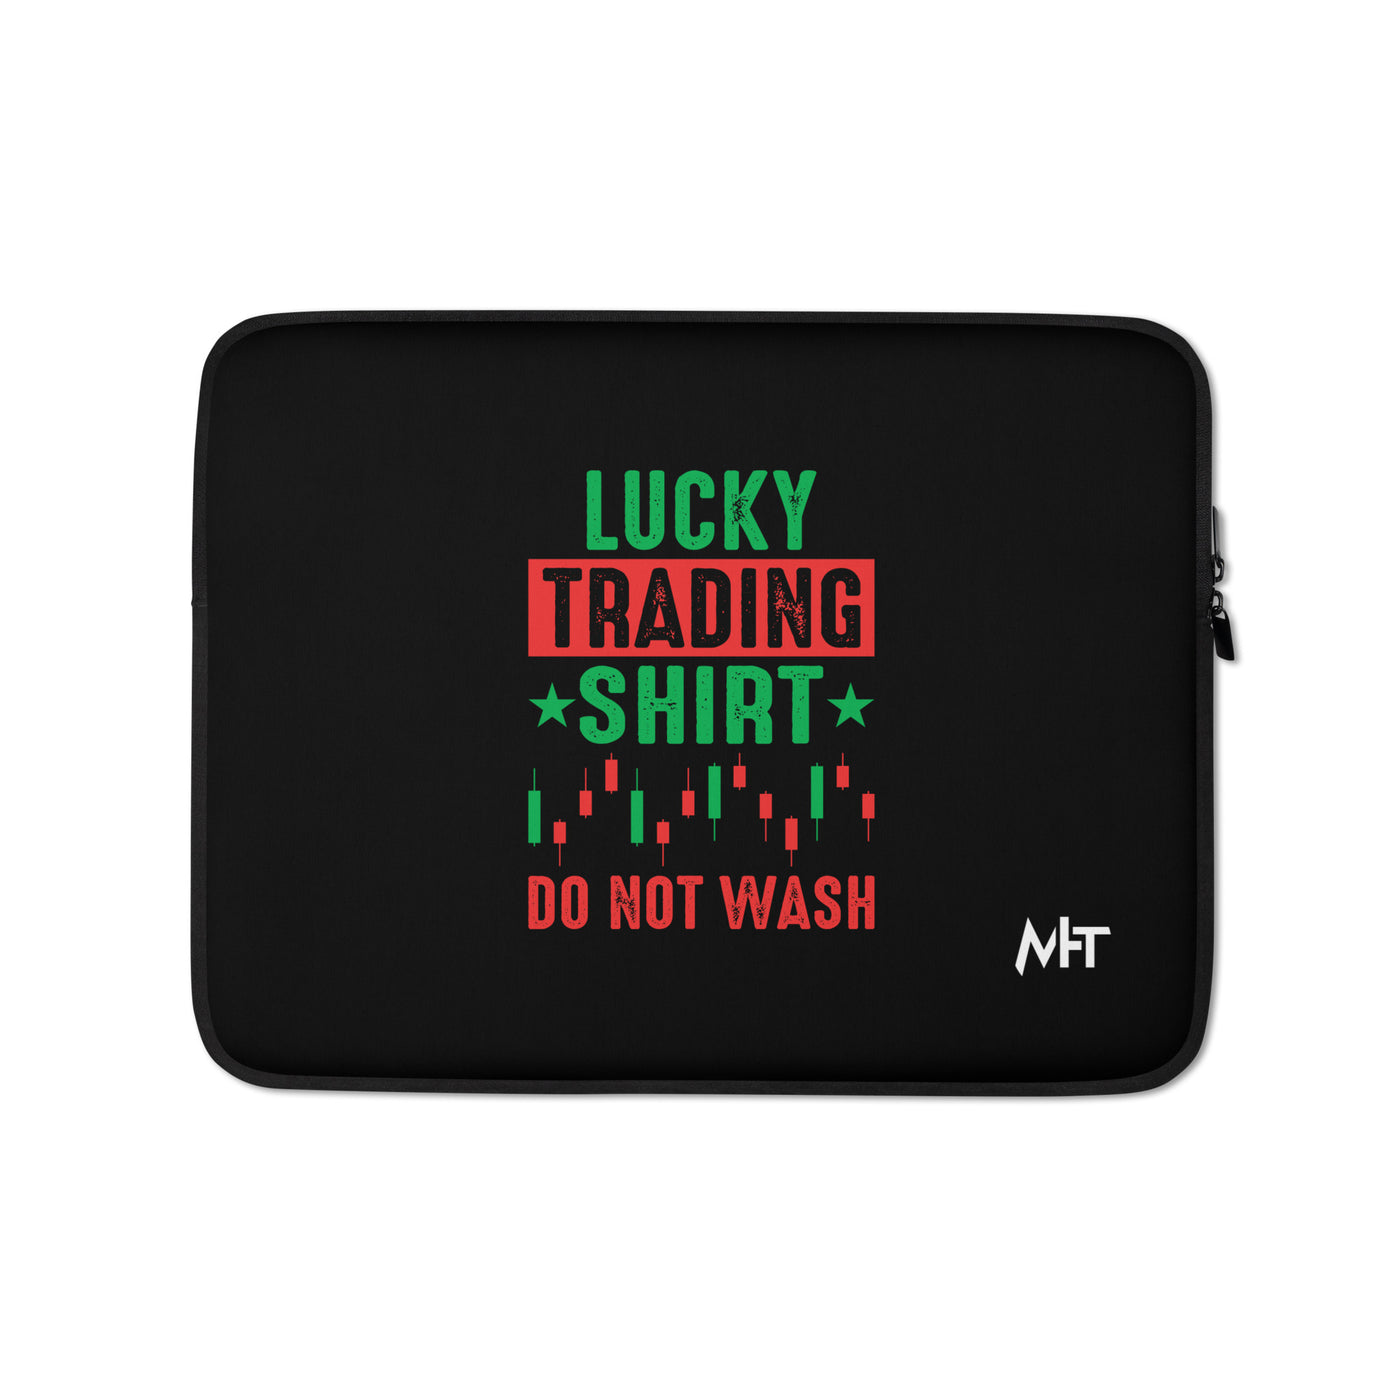 Lucky trading shirt do not Wash - Laptop Sleeve